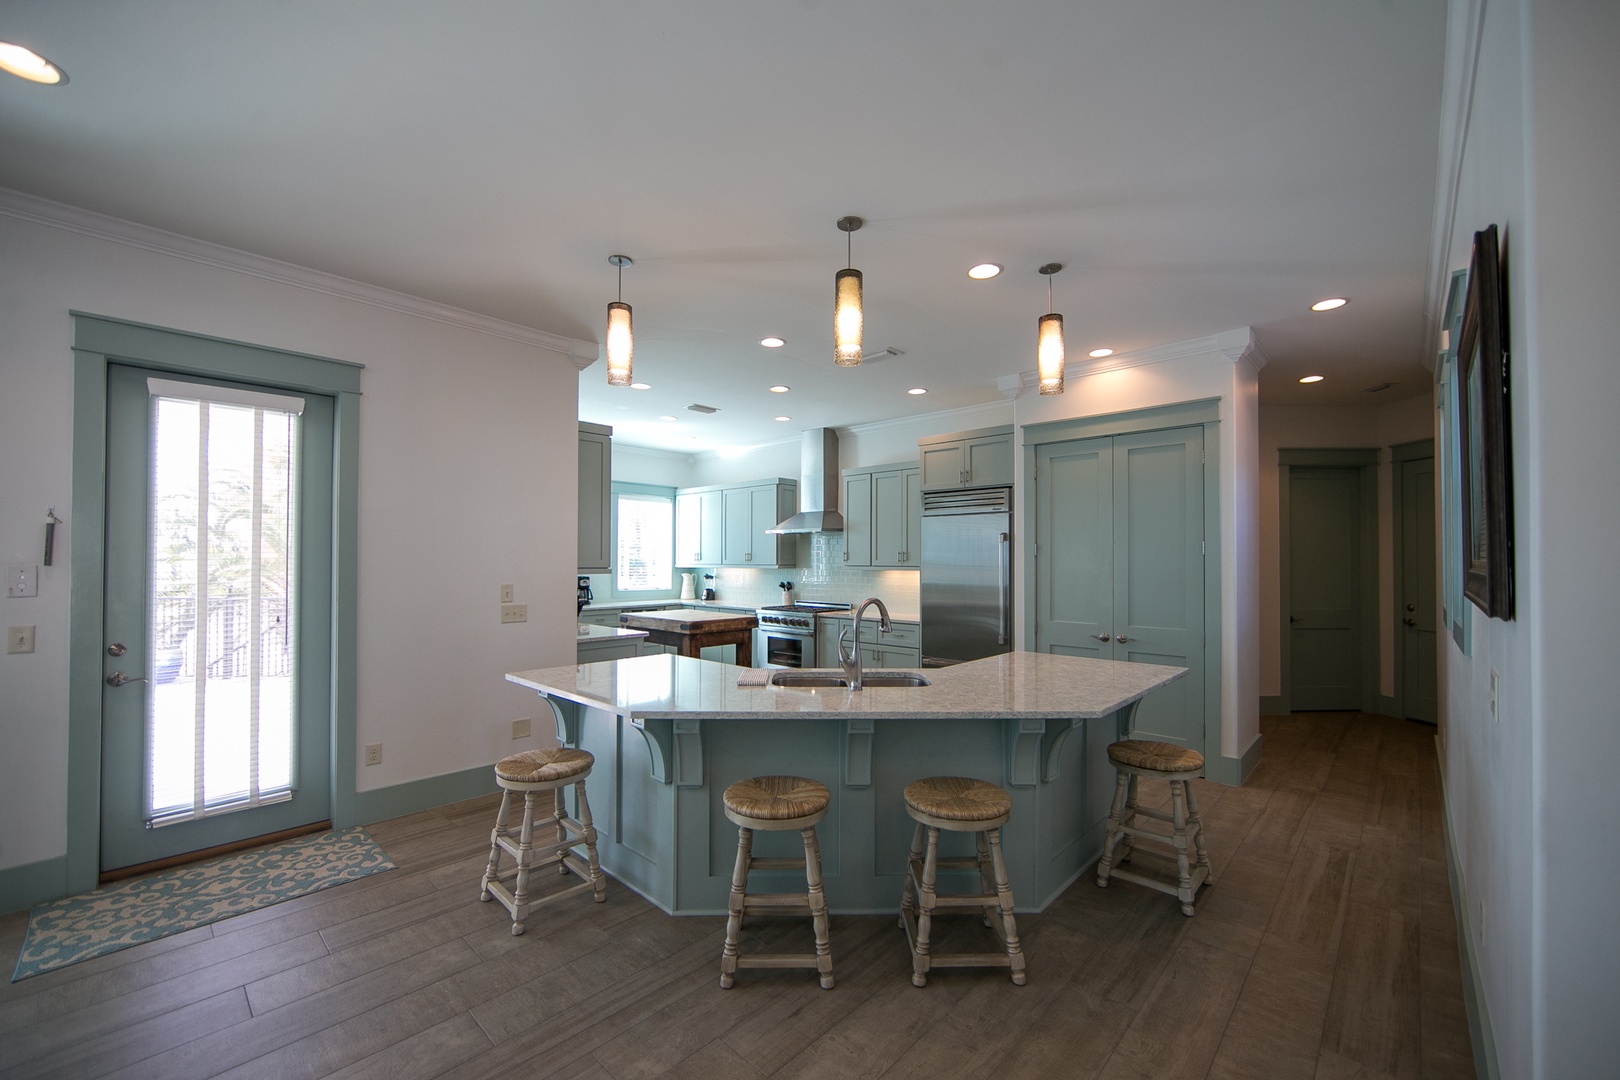 The kitchen island is great for additional seating!